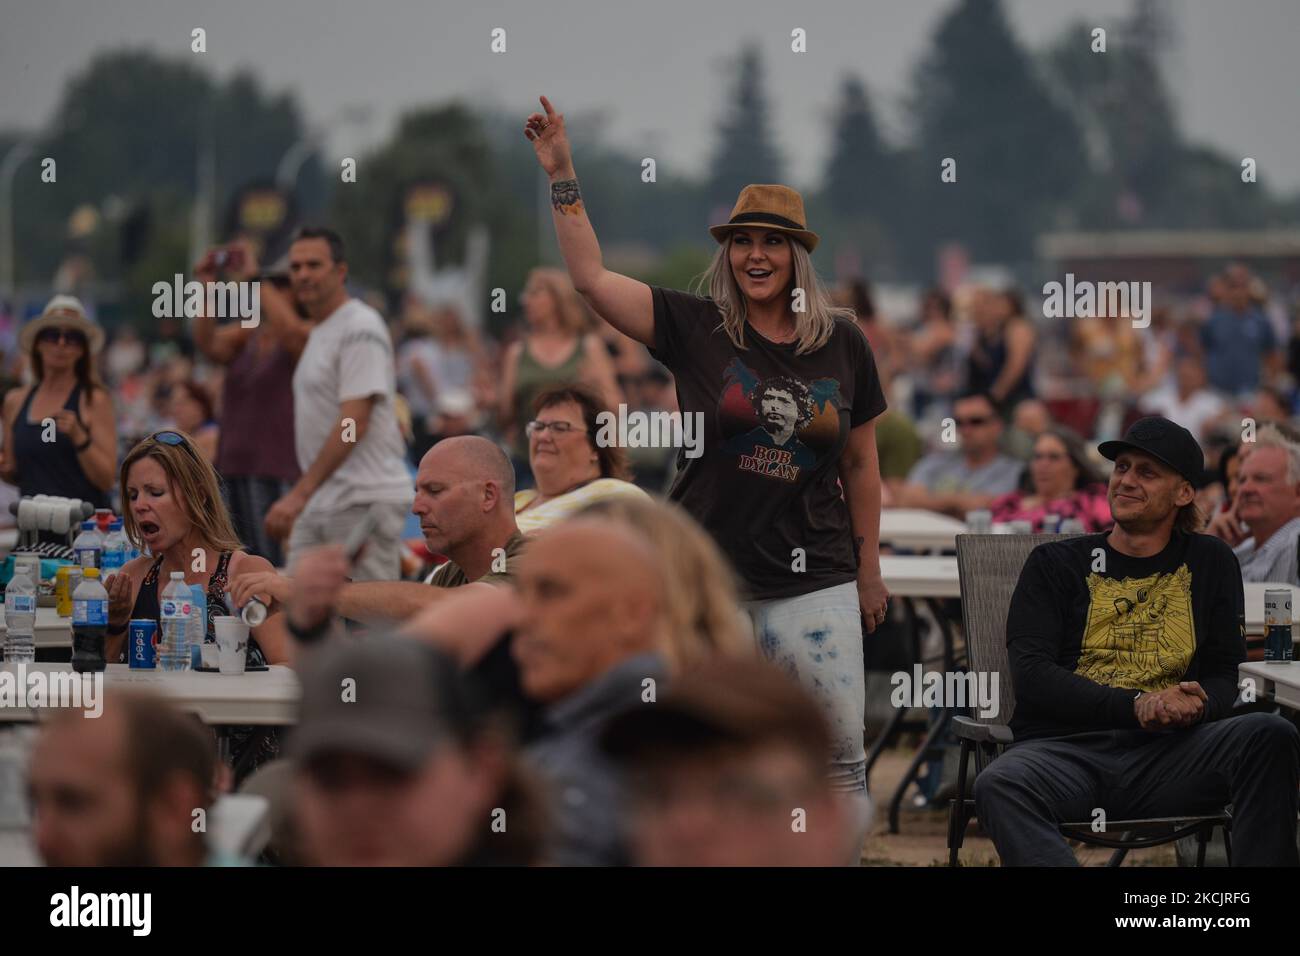 Members of the public enjoy the Glass Tiger live performance at Edmonton Rock Fest, a part of the Together Again series at the historic Racetrack Infield on the Edmonton Exhibition Lands (formerly Northlands Park) in Edmonton. On Saturday, 14 August 2021, in Edmonton, Alberta, Canada. (Photo by Artur Widak/NurPhoto) Stock Photo